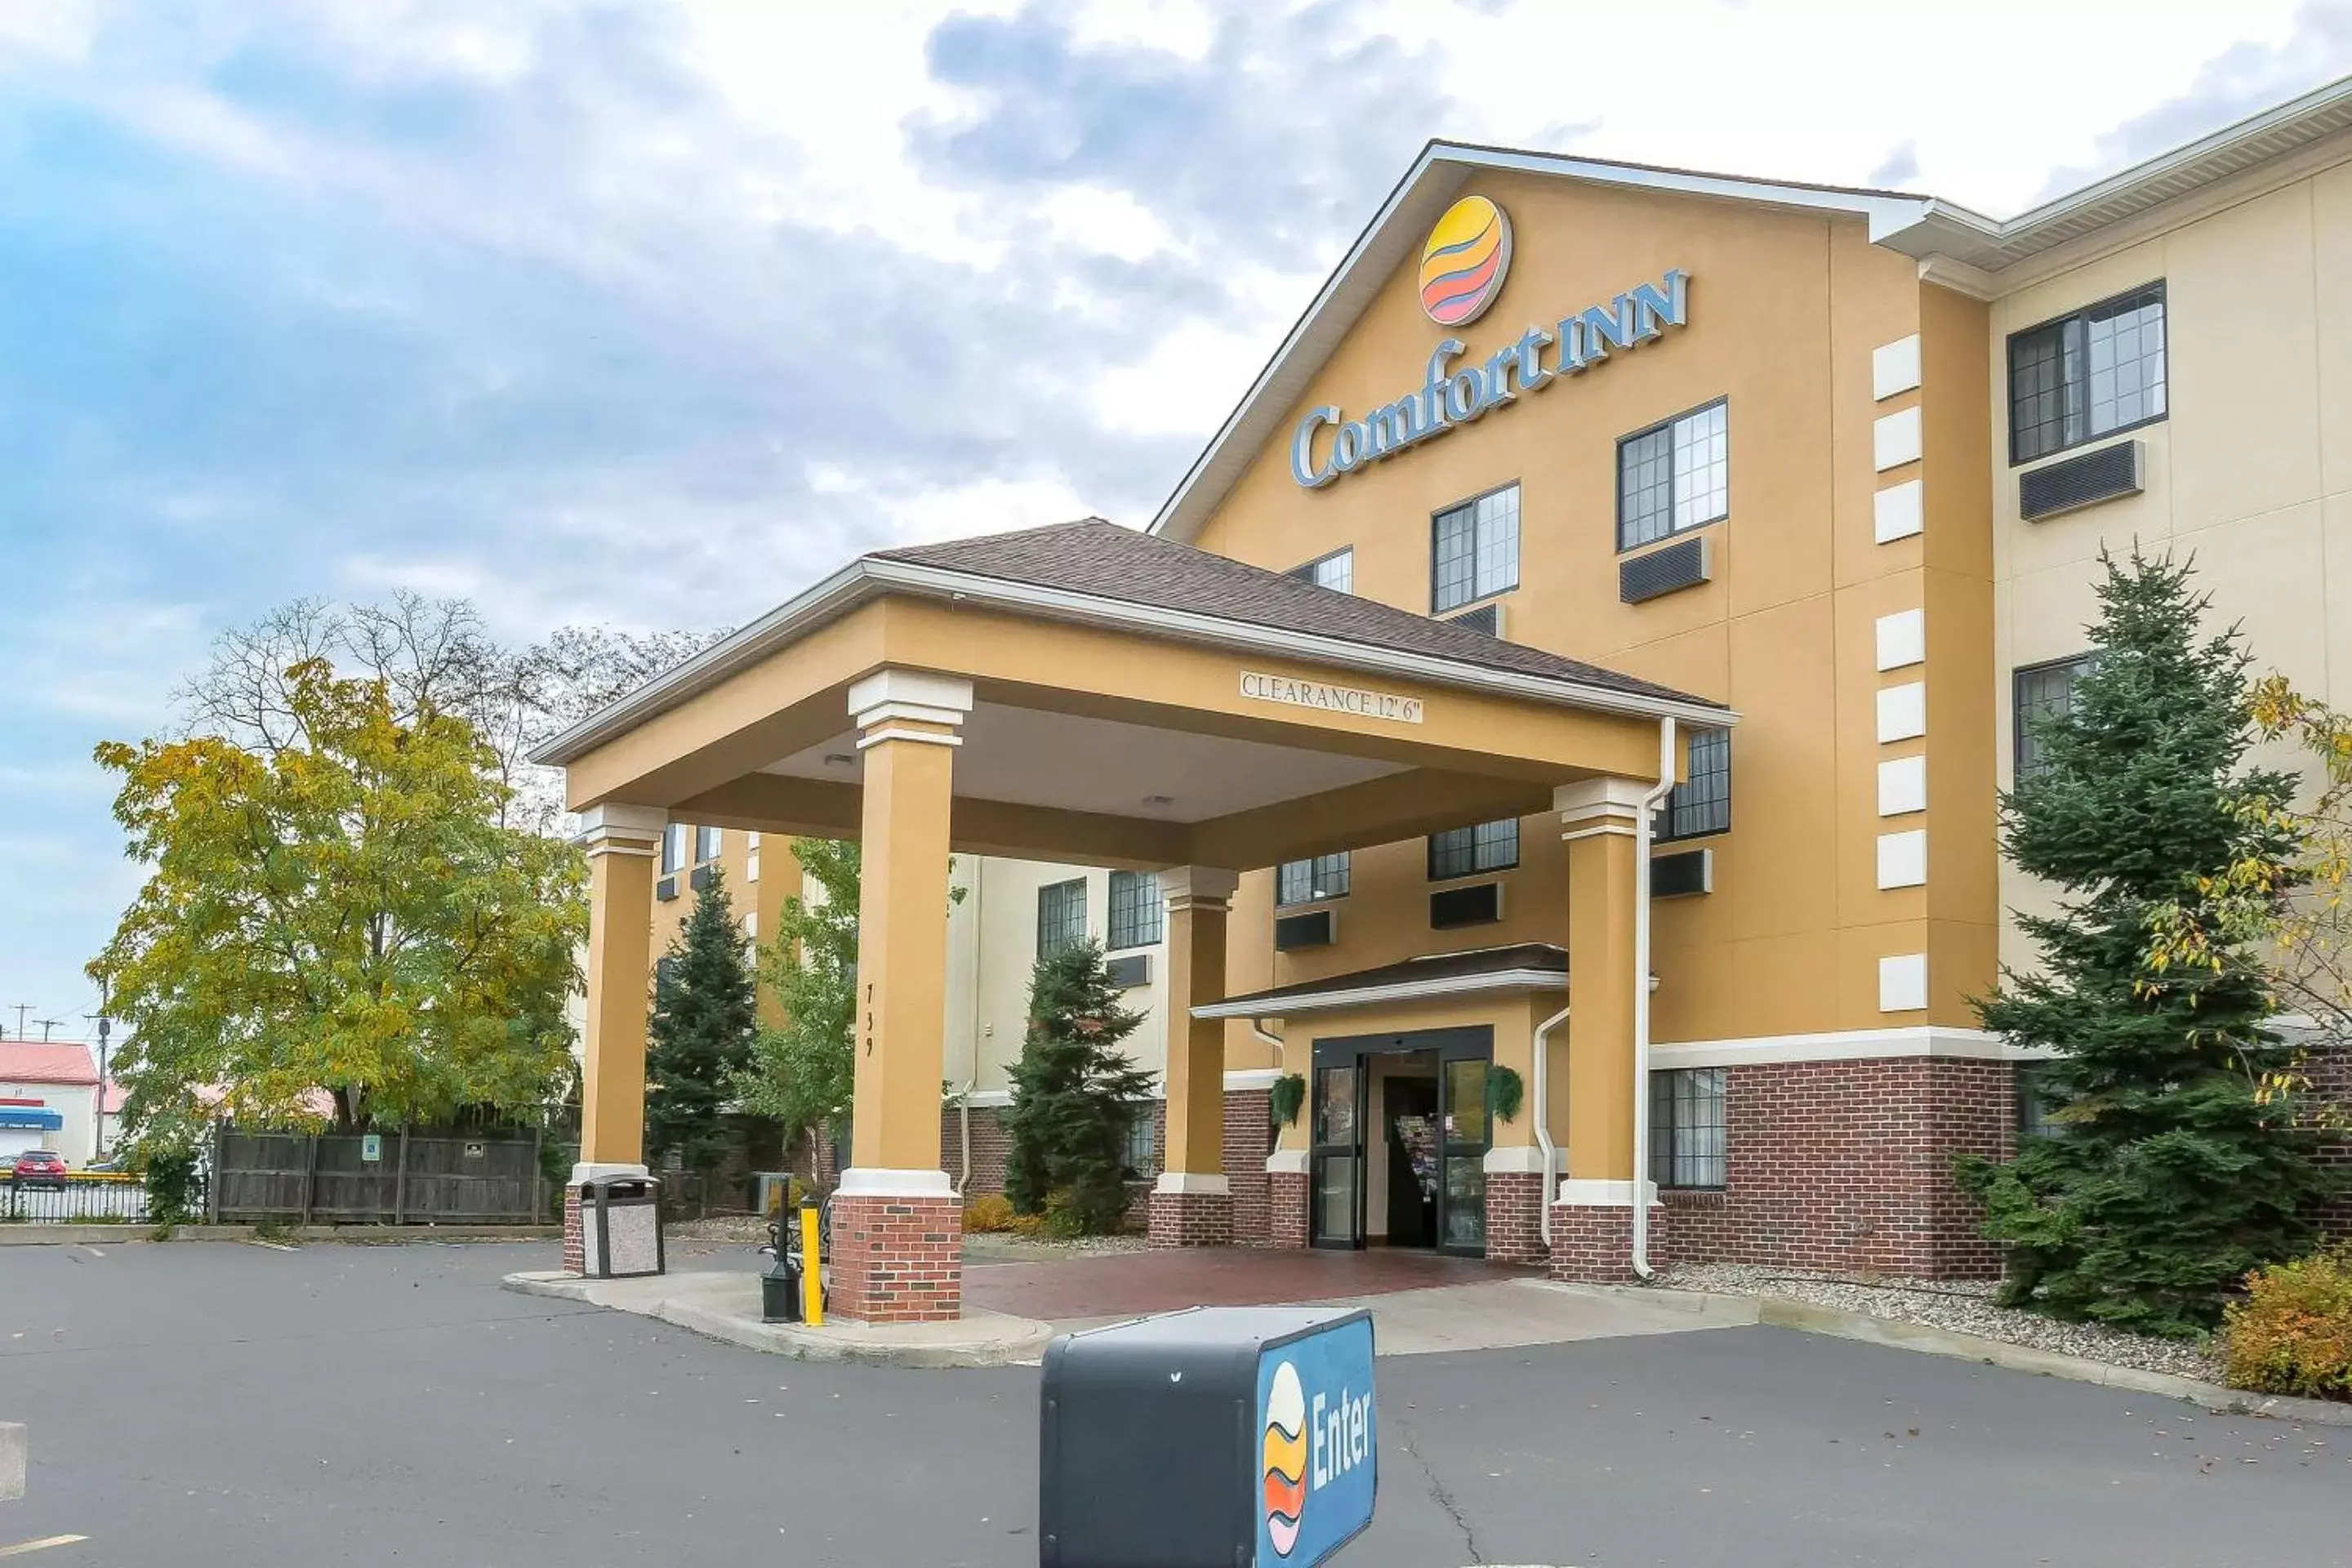 Property building in Comfort Inn Downtown - University Area